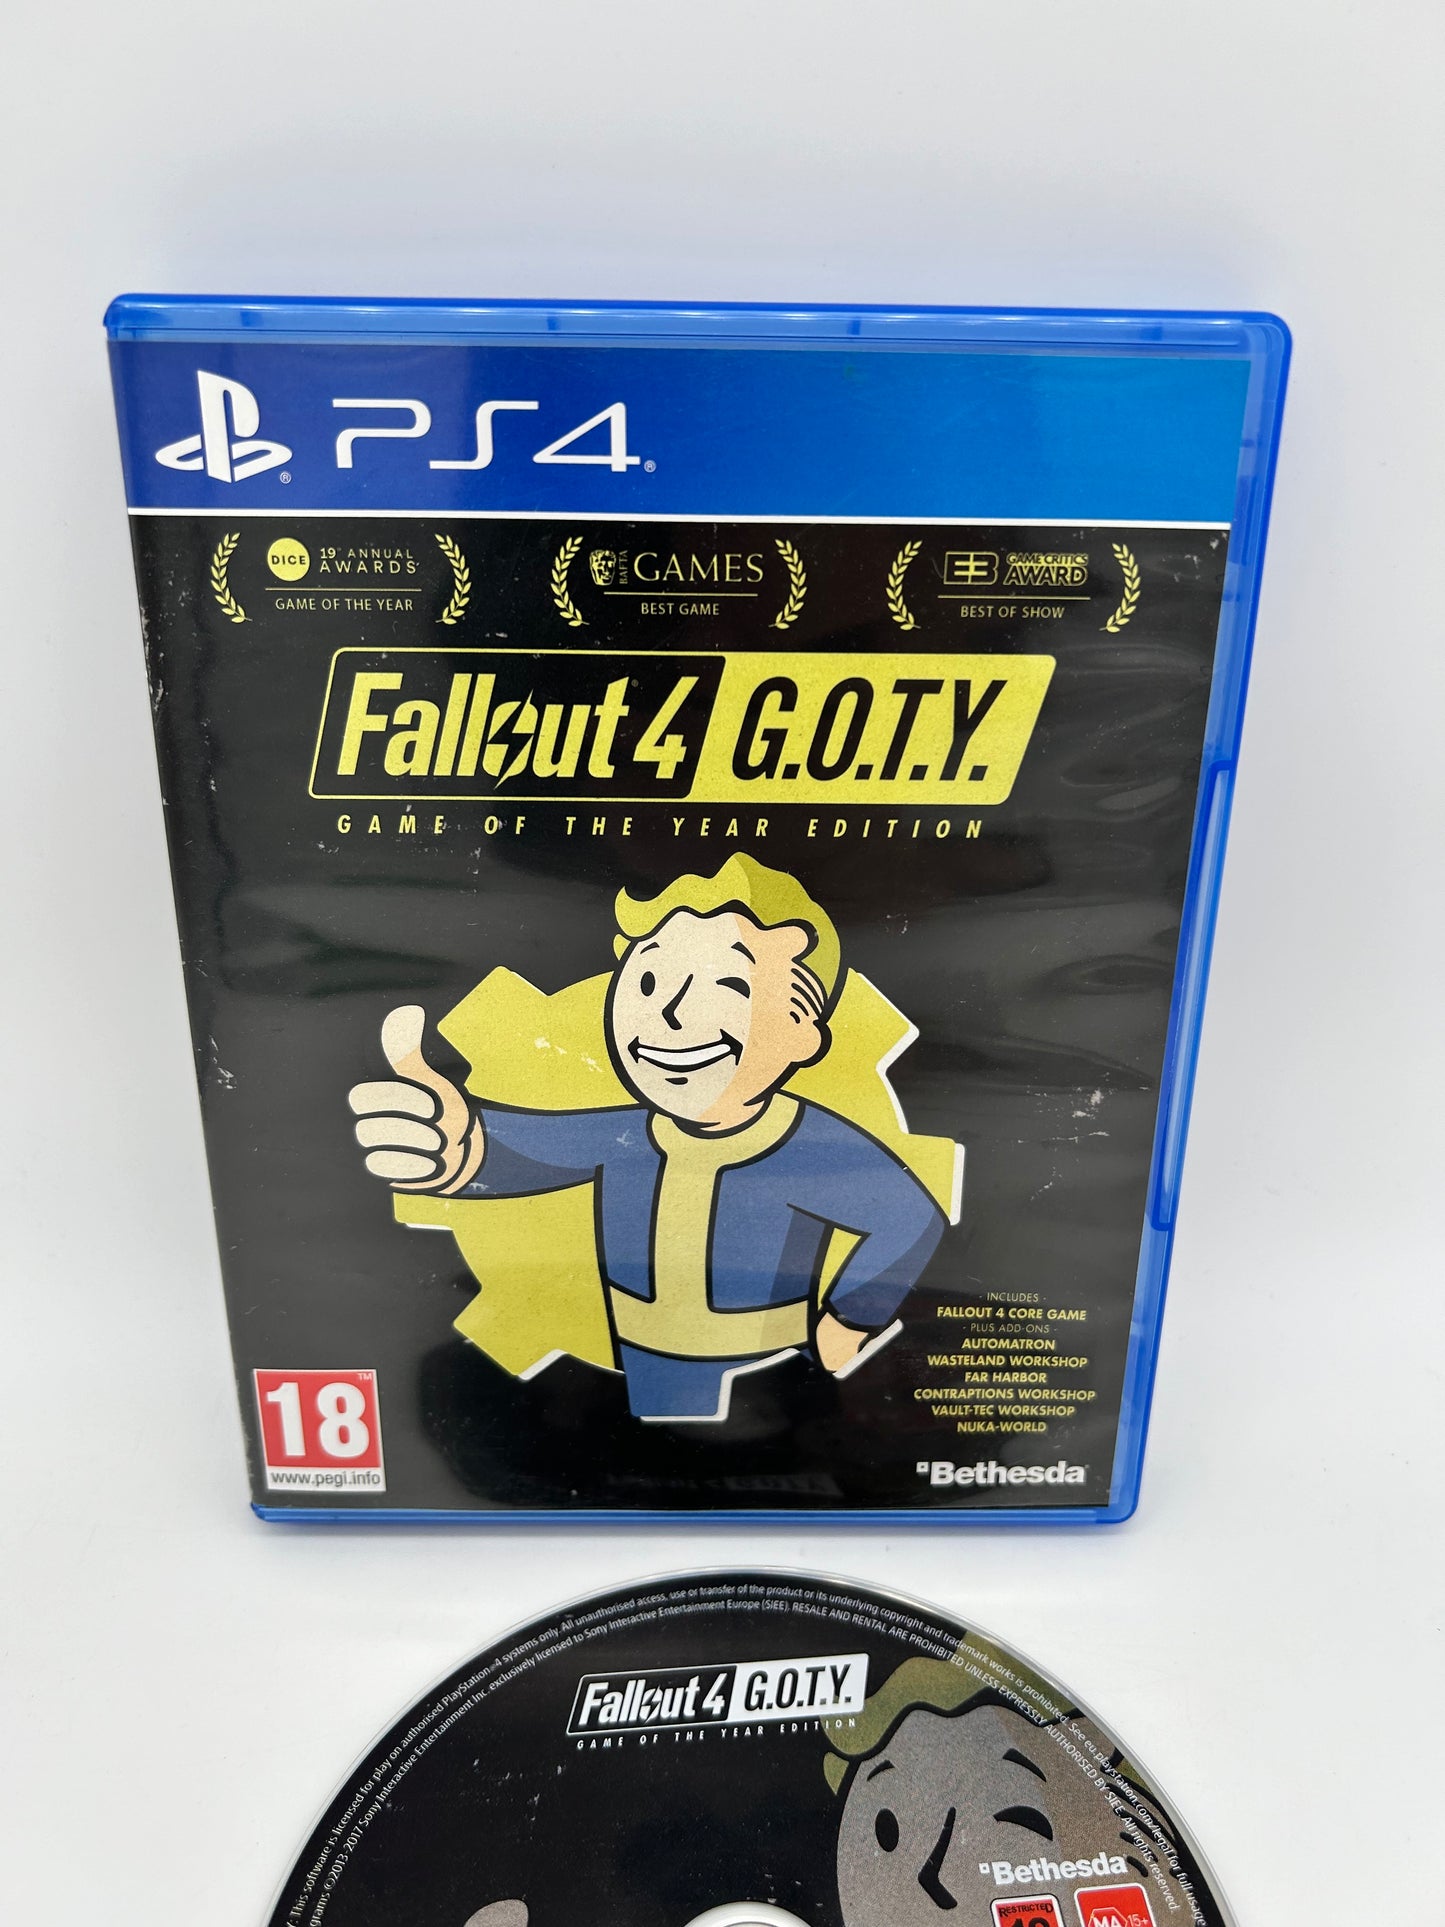 SONY PLAYSTATiON 4 [PS4] | FALLOUT 4 GOTY | GAME OF THE YEAR EDiTiON